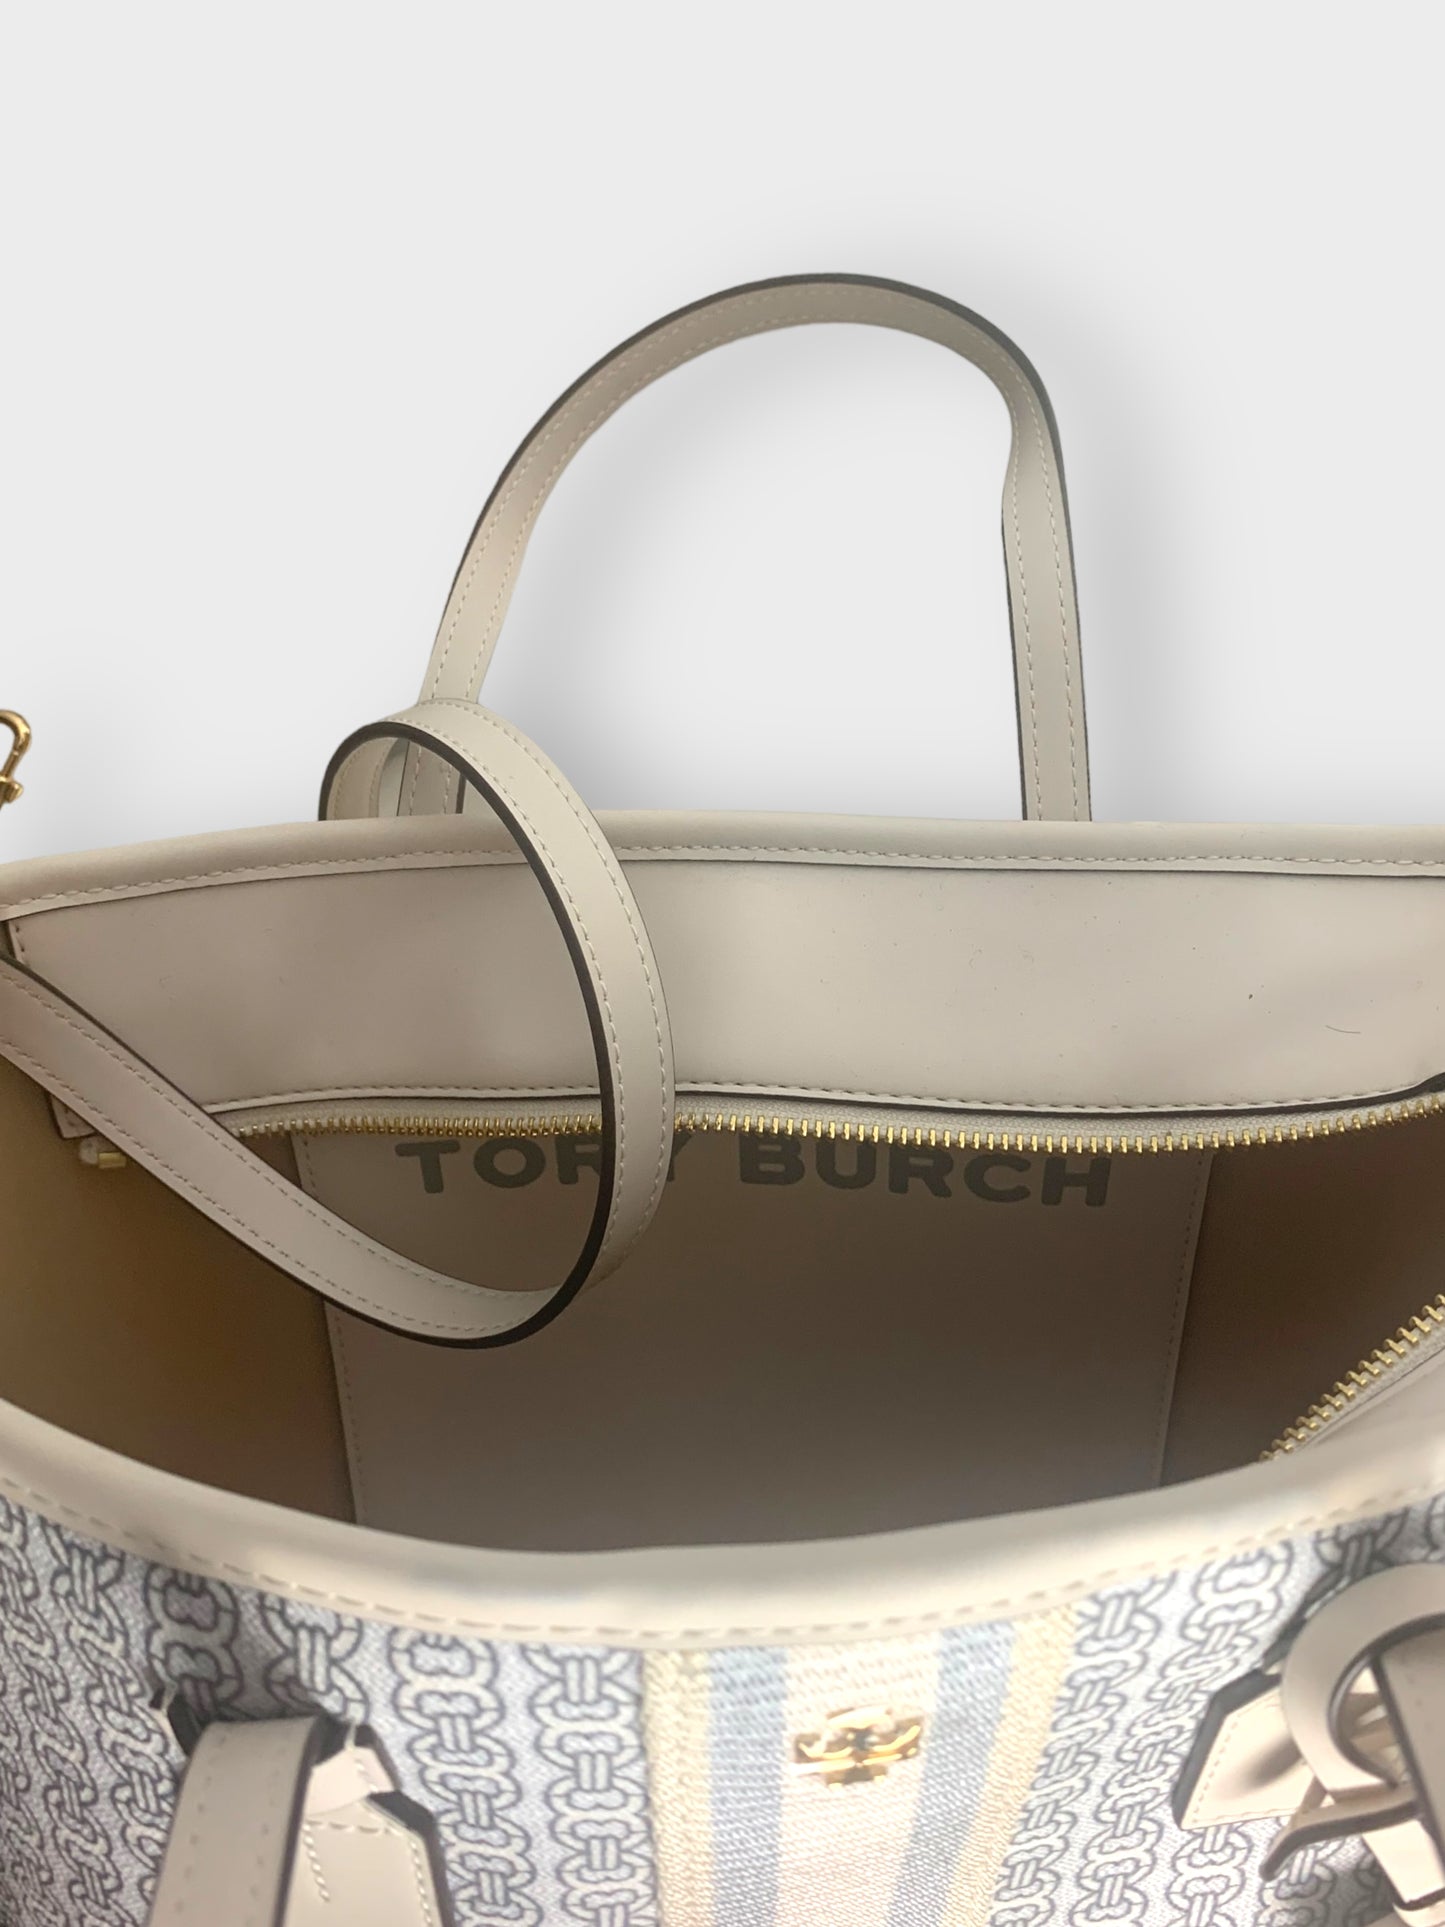 Tory Burch canvas tote